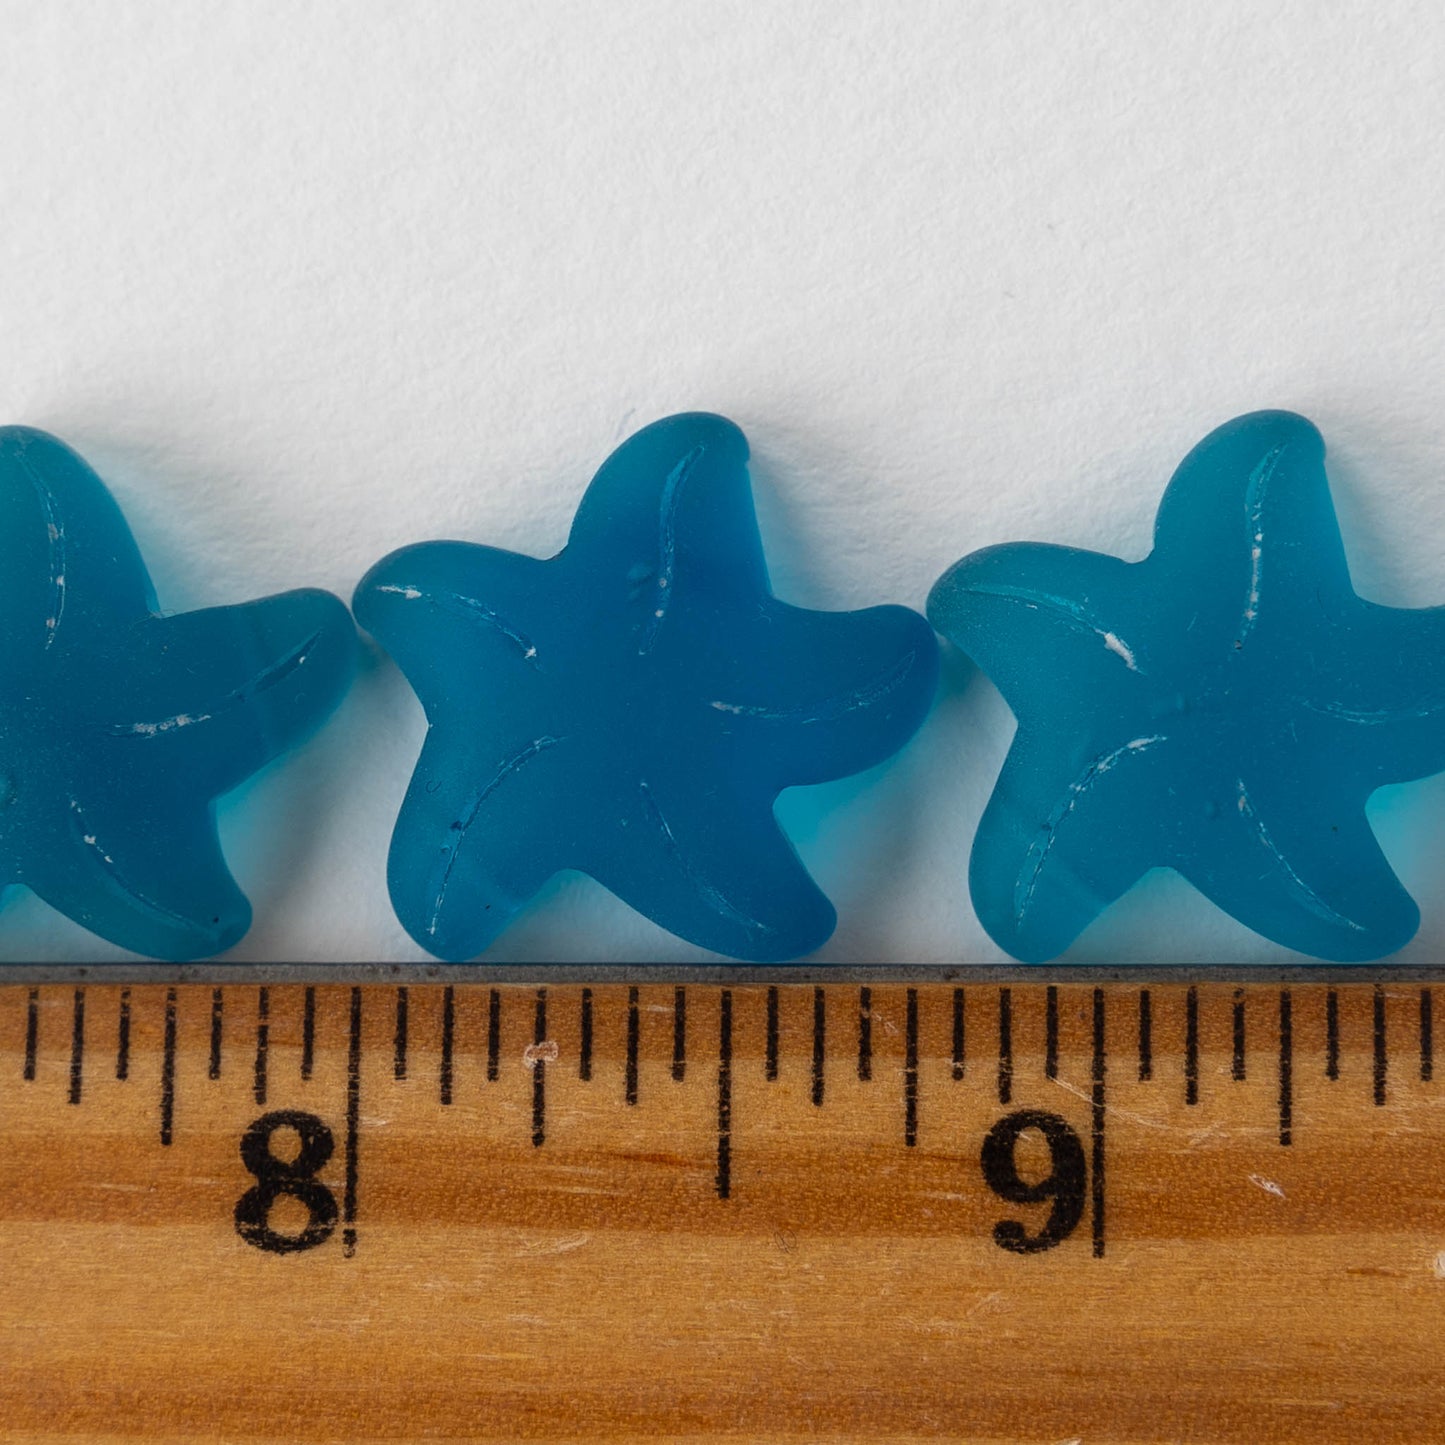 Frosted Starfish Pendant - Teal - 4 Pendants